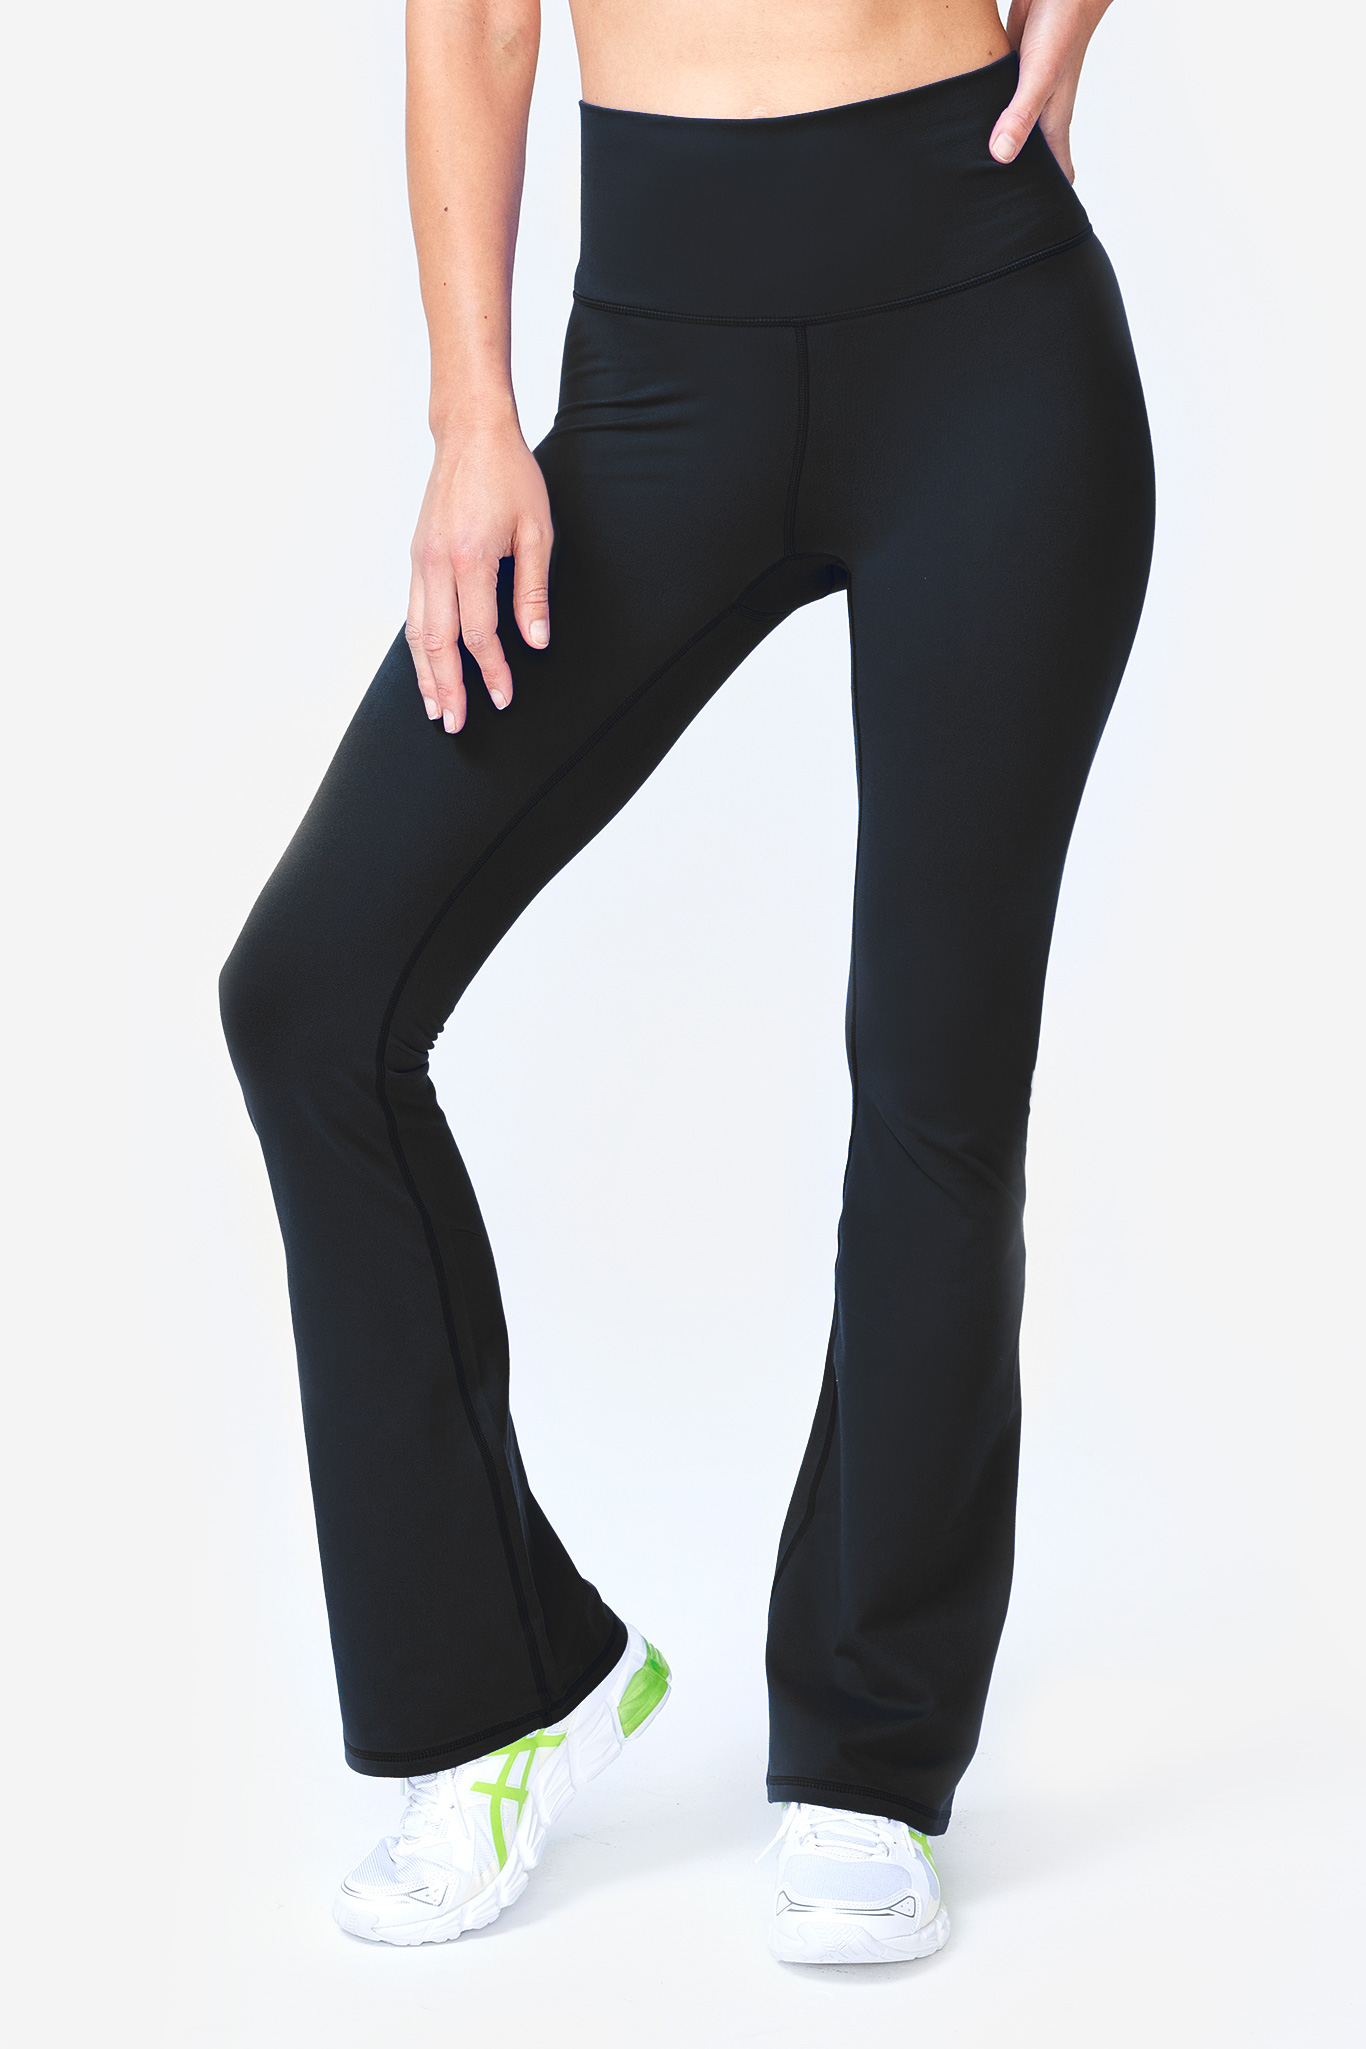 High Waist Flare Leg Yoga Pants, Stretchy Solid Slim Fitting Ankle